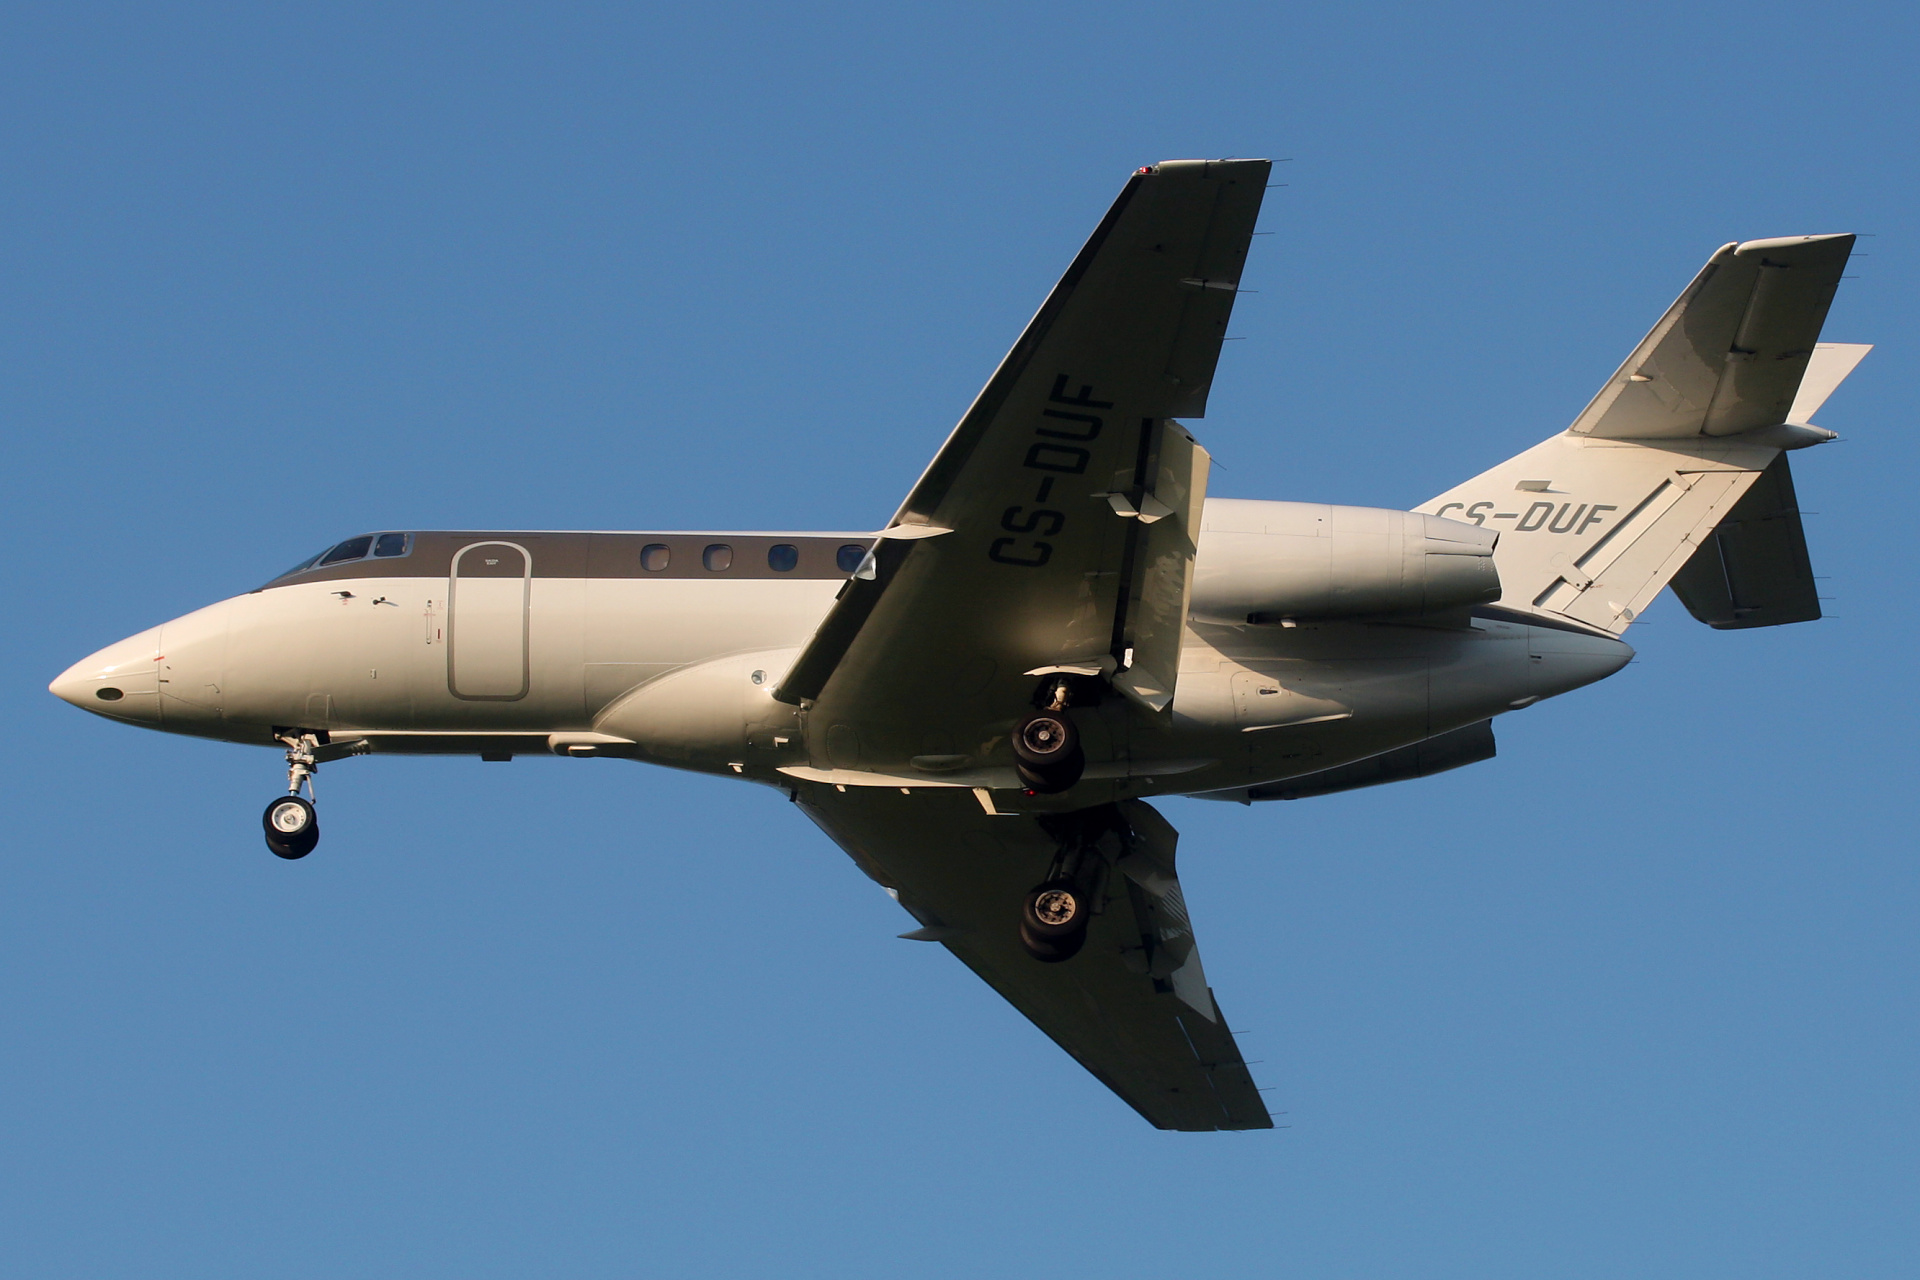 CS-DUF, NetJets Europe (Aircraft » EPWA Spotting » BAe 125 and revisions » Raytheon Hawker 750)